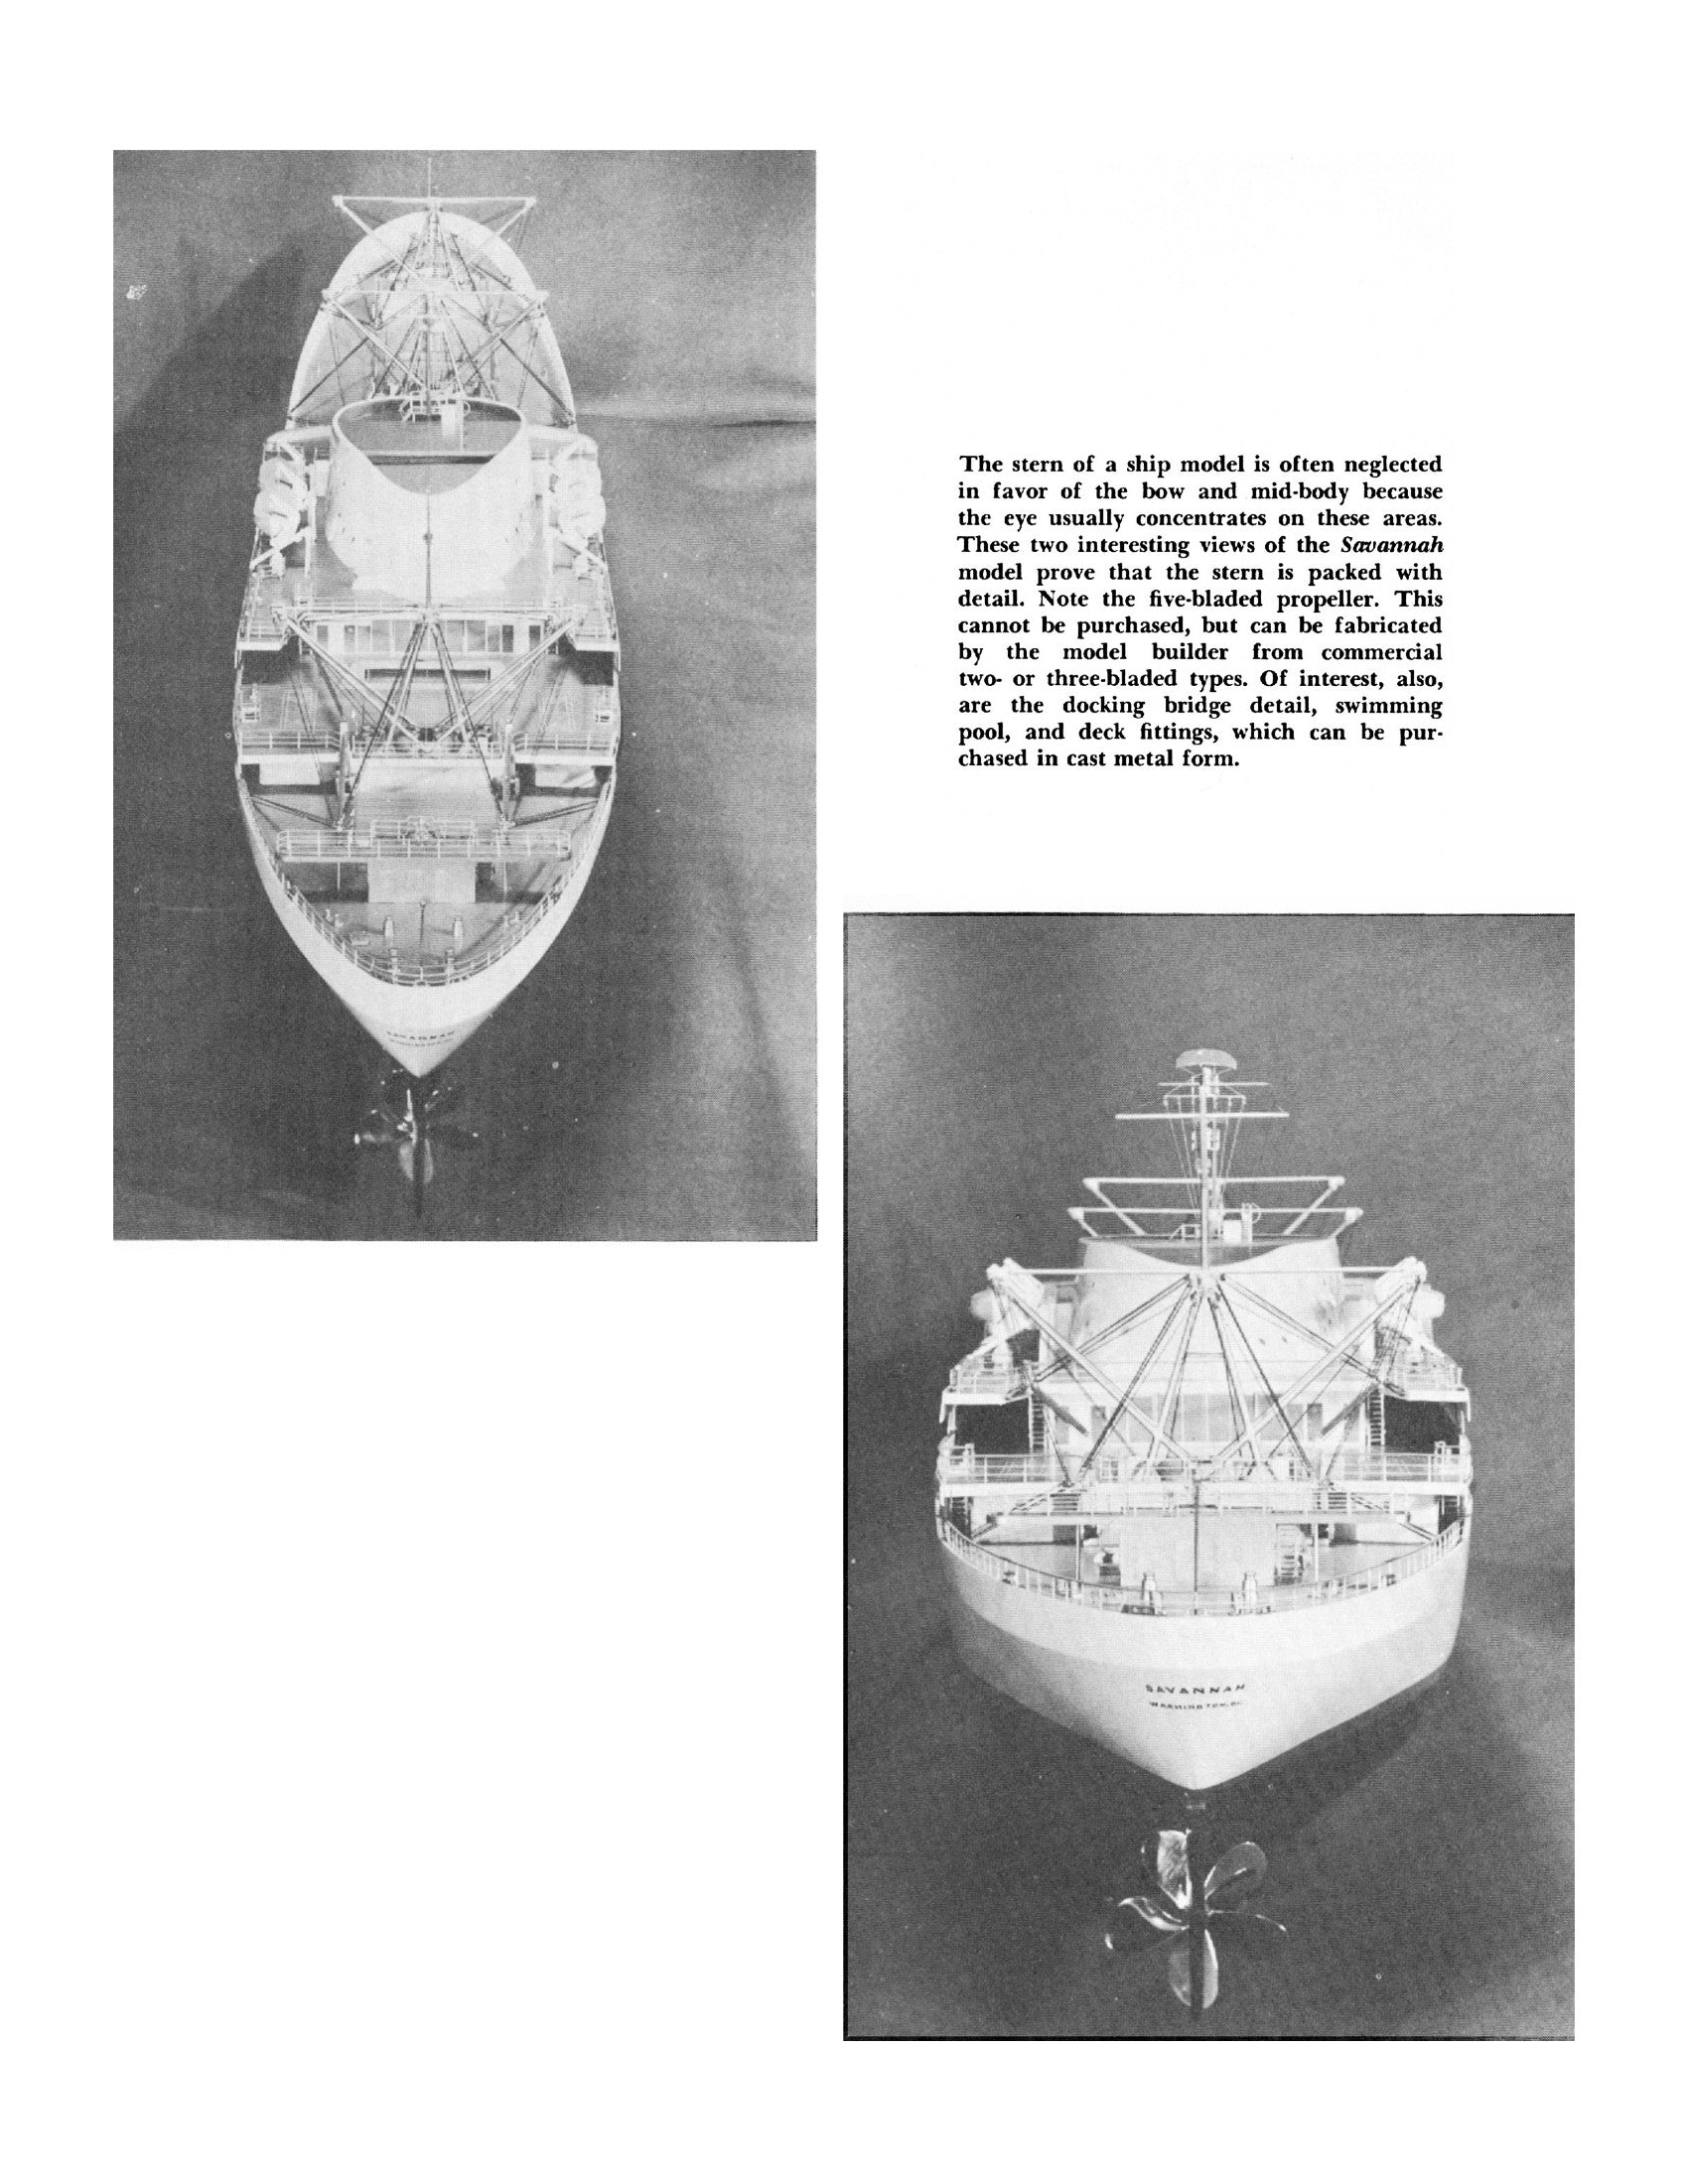 full size printed plans scale 1:192 n.s. savannah  atomic liner suitable for radio control or display